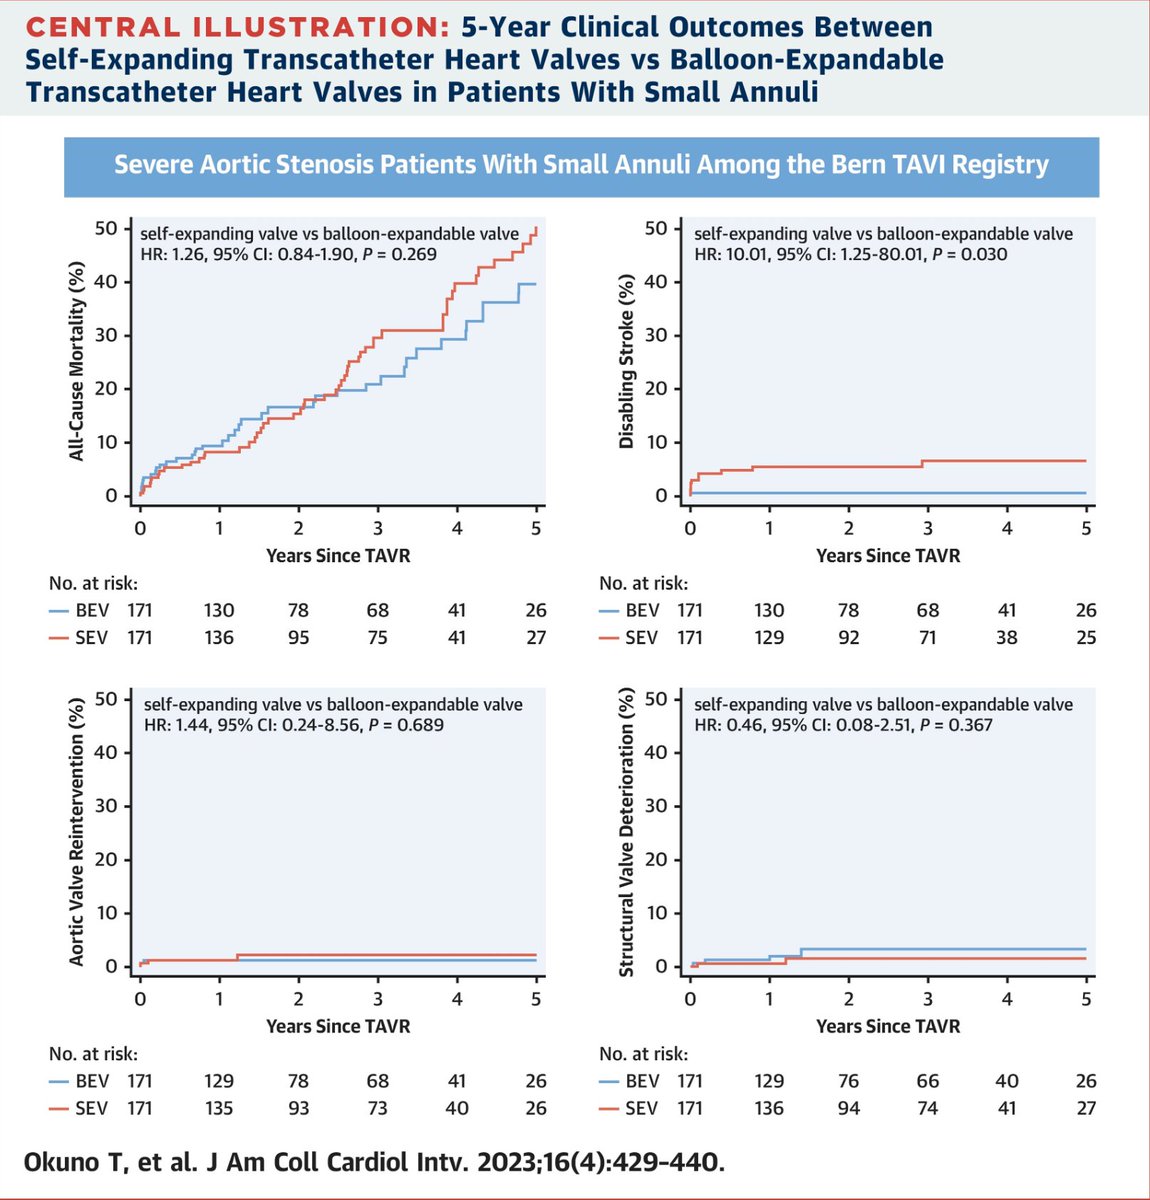 In a 1:1 propensity-matched analysis the echocardiographic hemodynamic advantage of self-expanding THVs was not associated with better clinical outcomes compared with balloon-expandable THVs up to 5 years in patients with small annuli. jacc.org/doi/10.1016/j.…